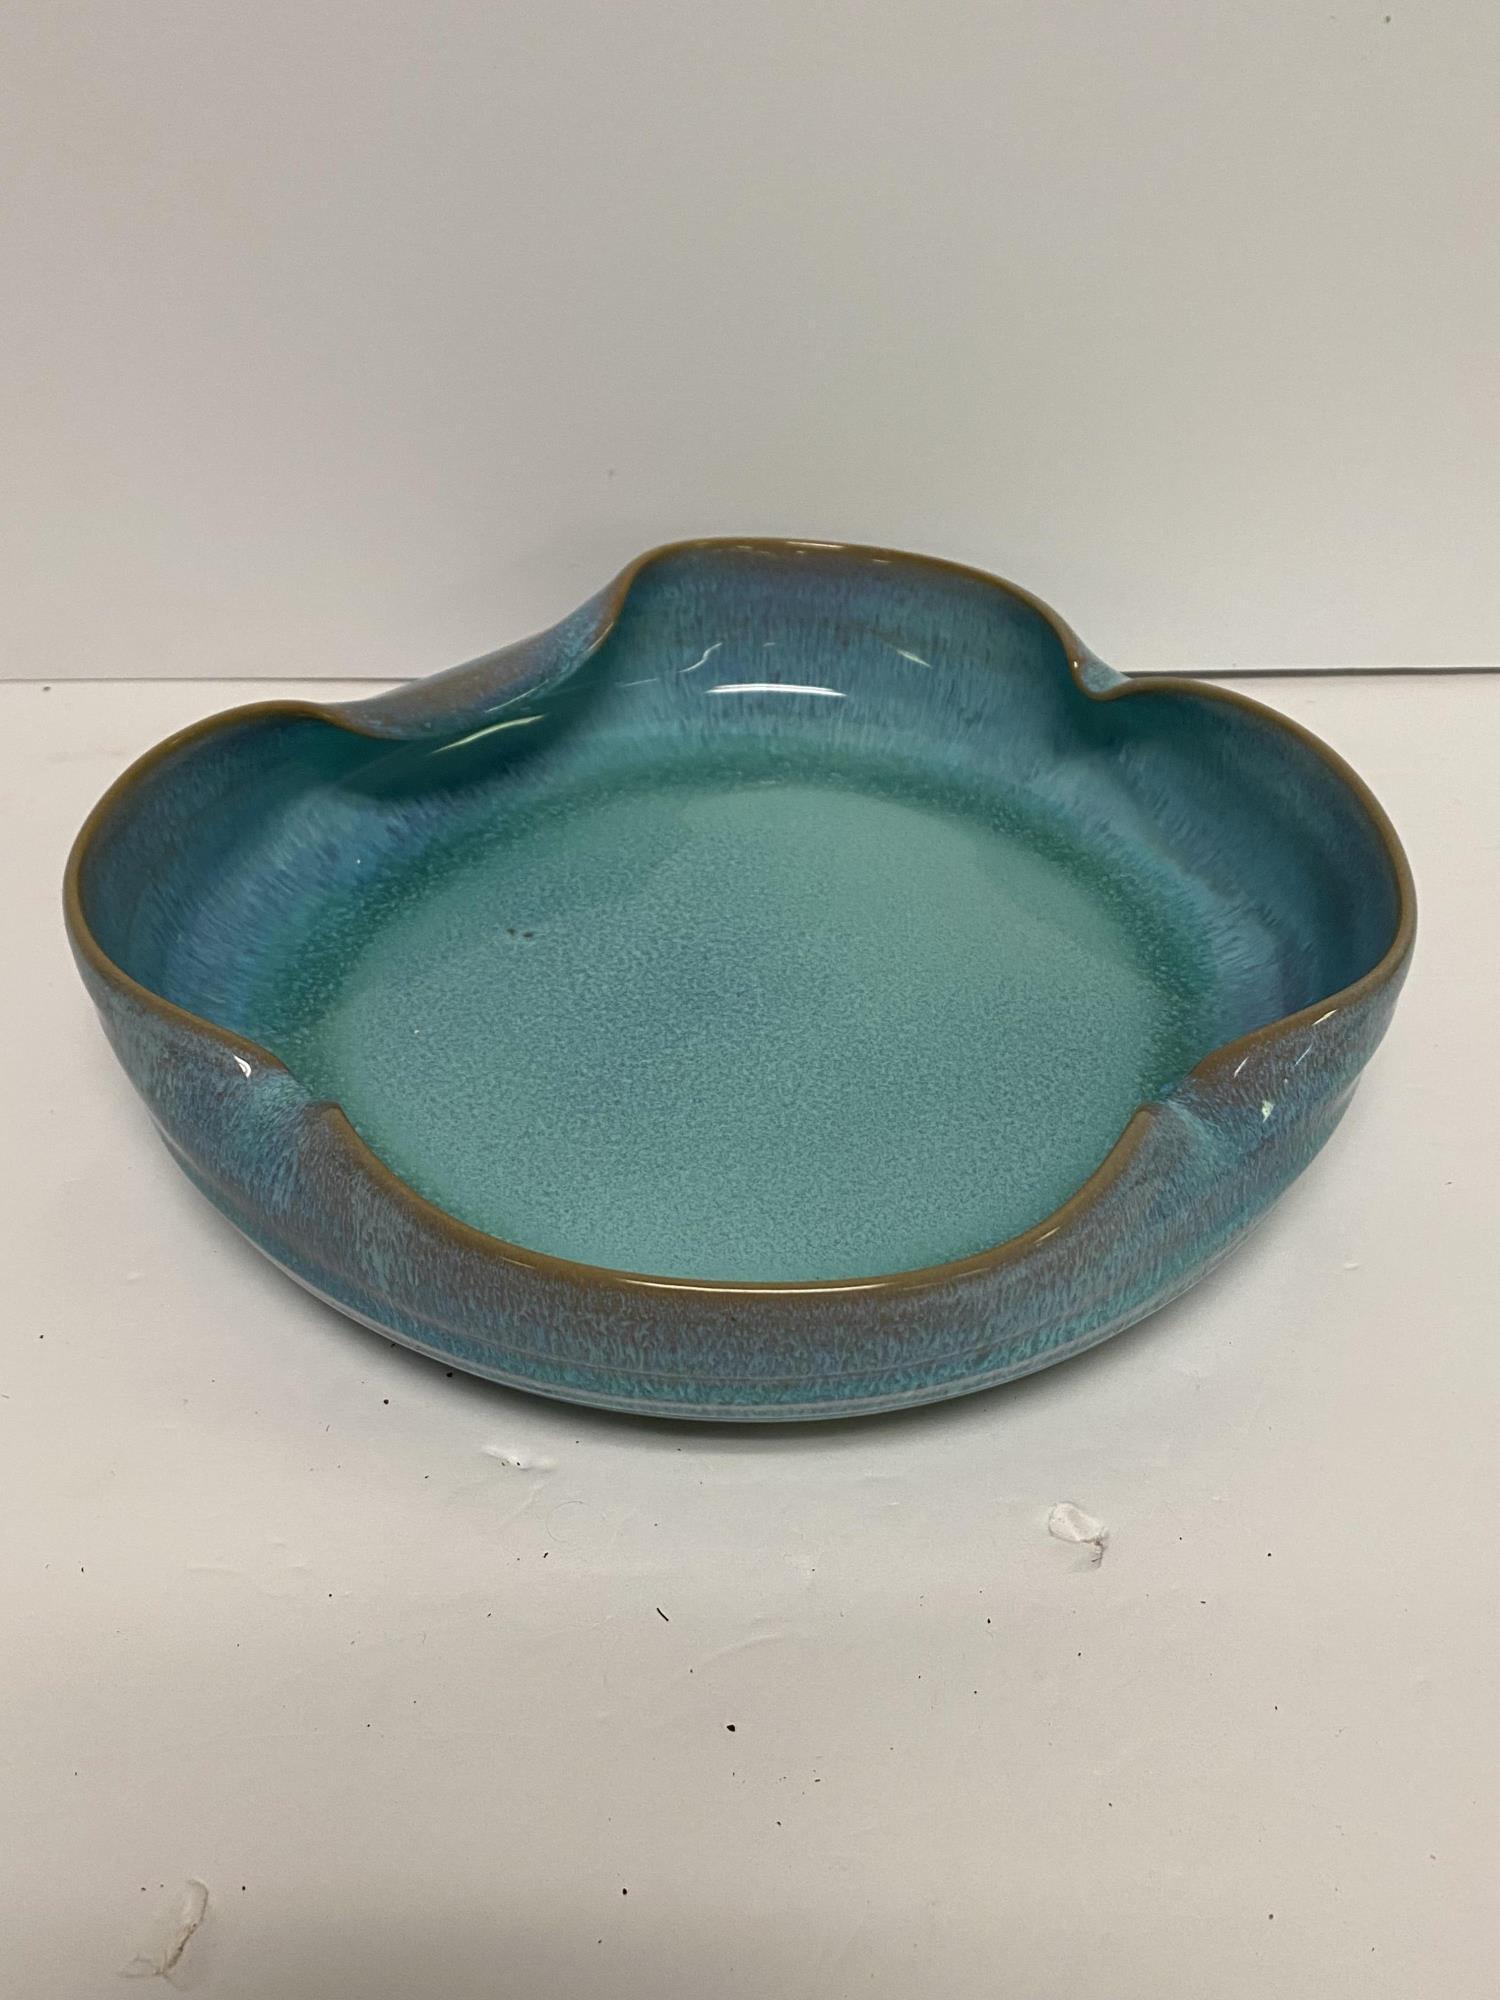 PAIR OF BEAUTIFUL BLUE POTTERY PIECES